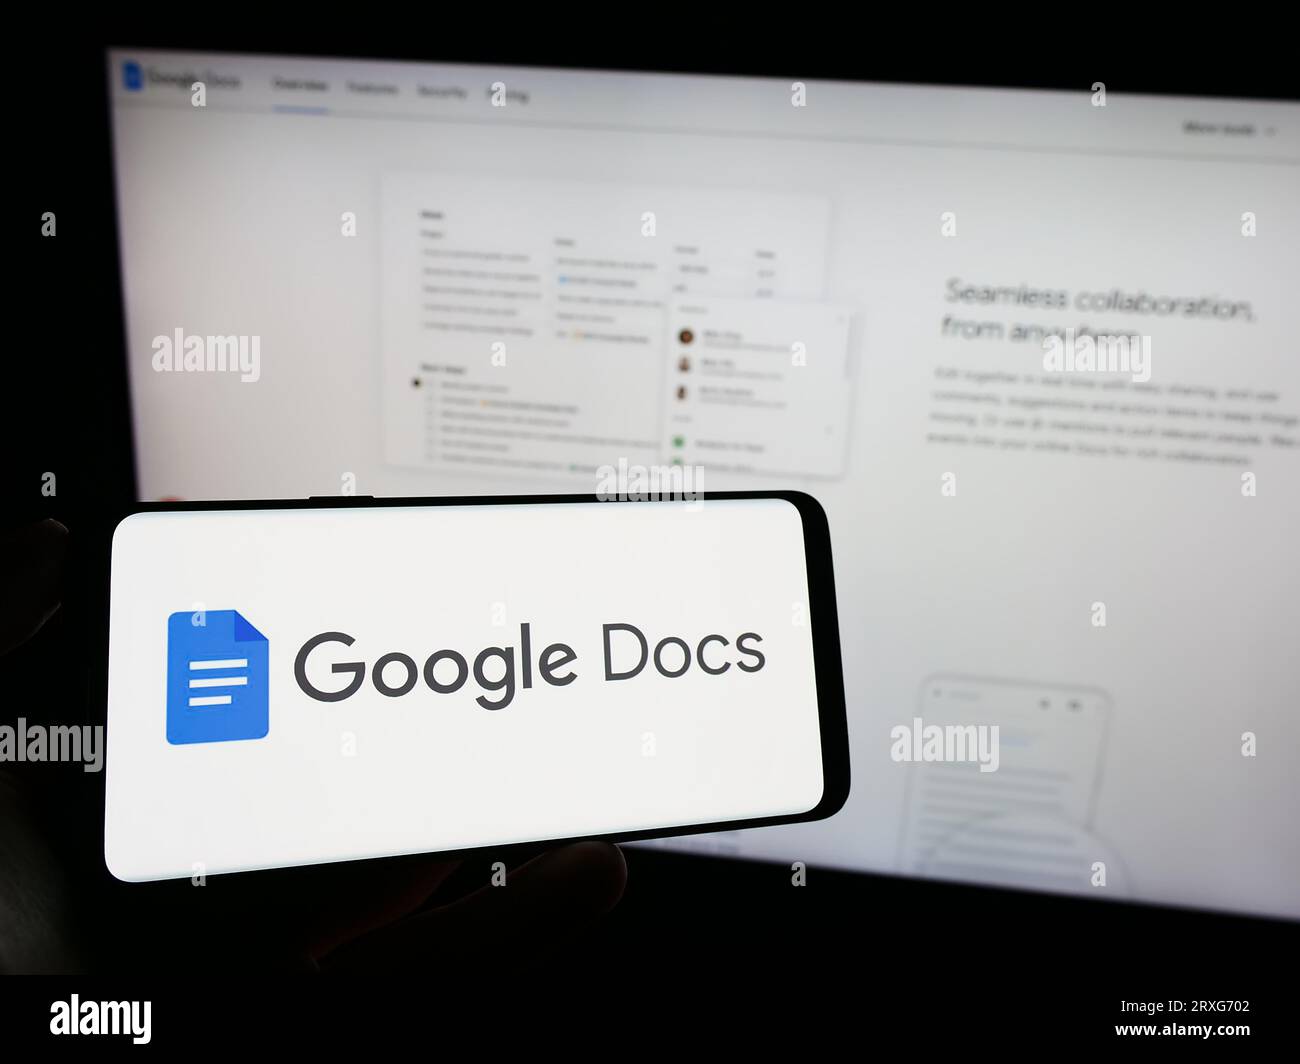 Person holding cellphone with logo of online word processing product Google Docs on screen in front of company webpage. Focus on phone display. Stock Photo